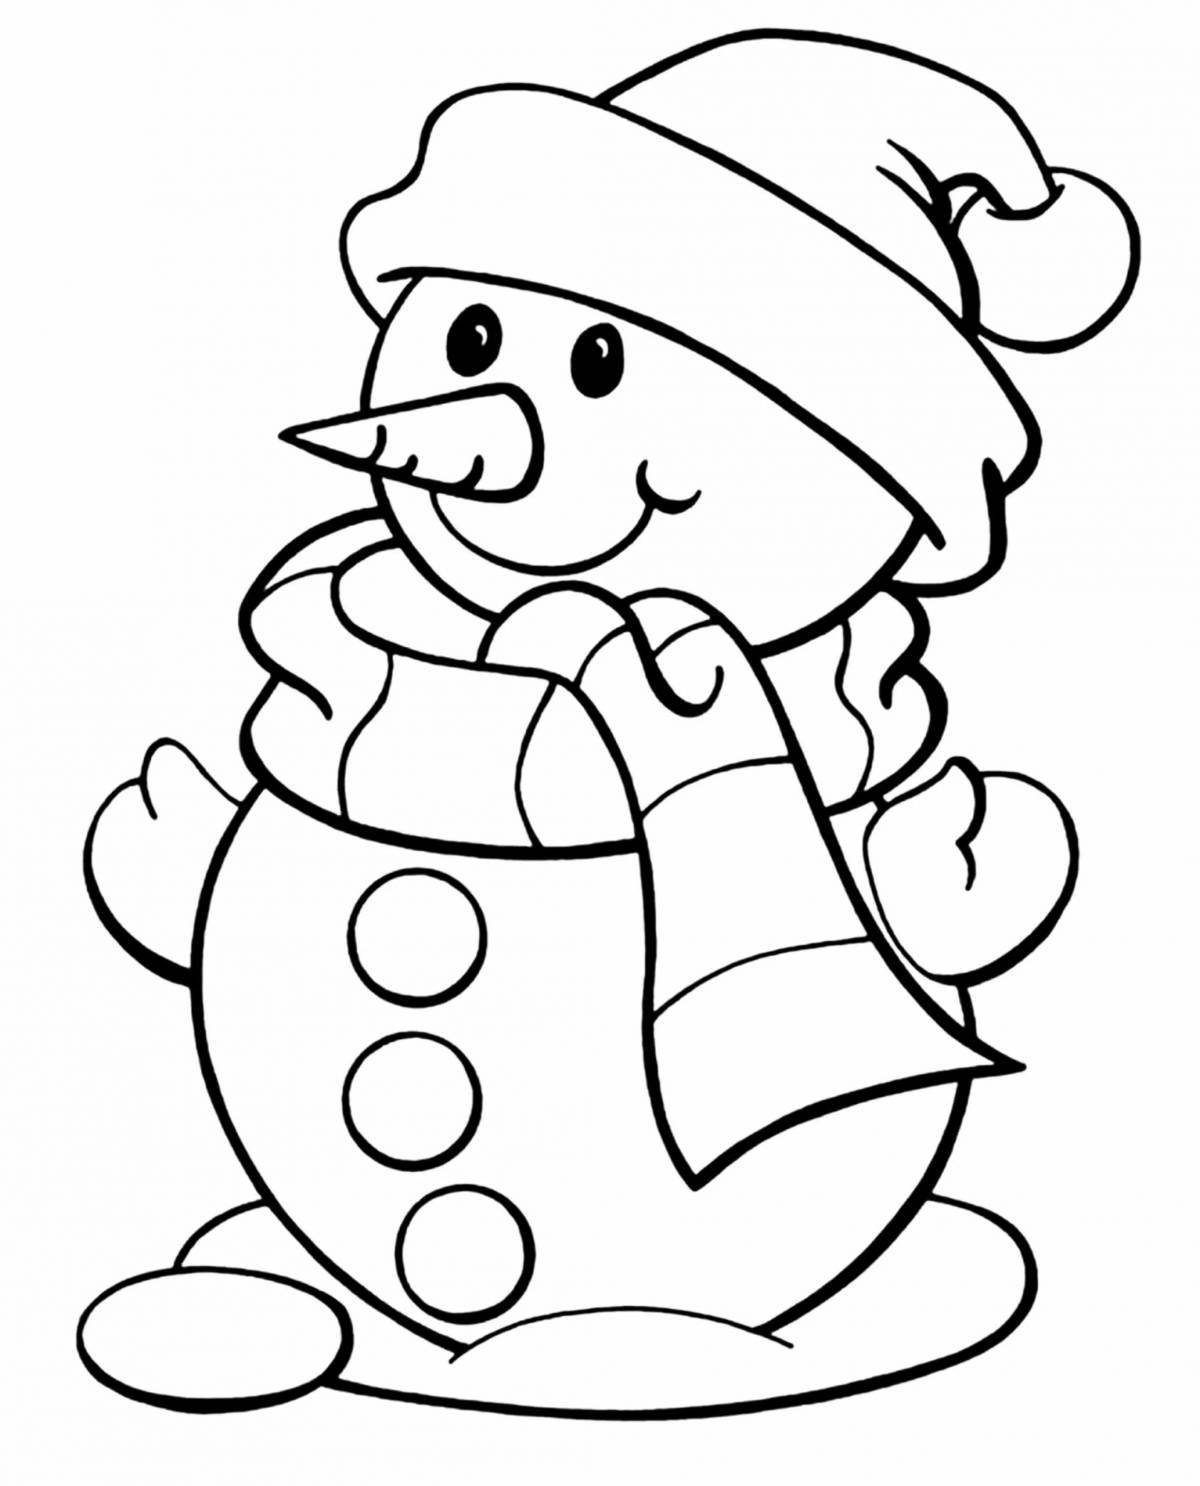 Luminous snowman coloring book for children 5 years old